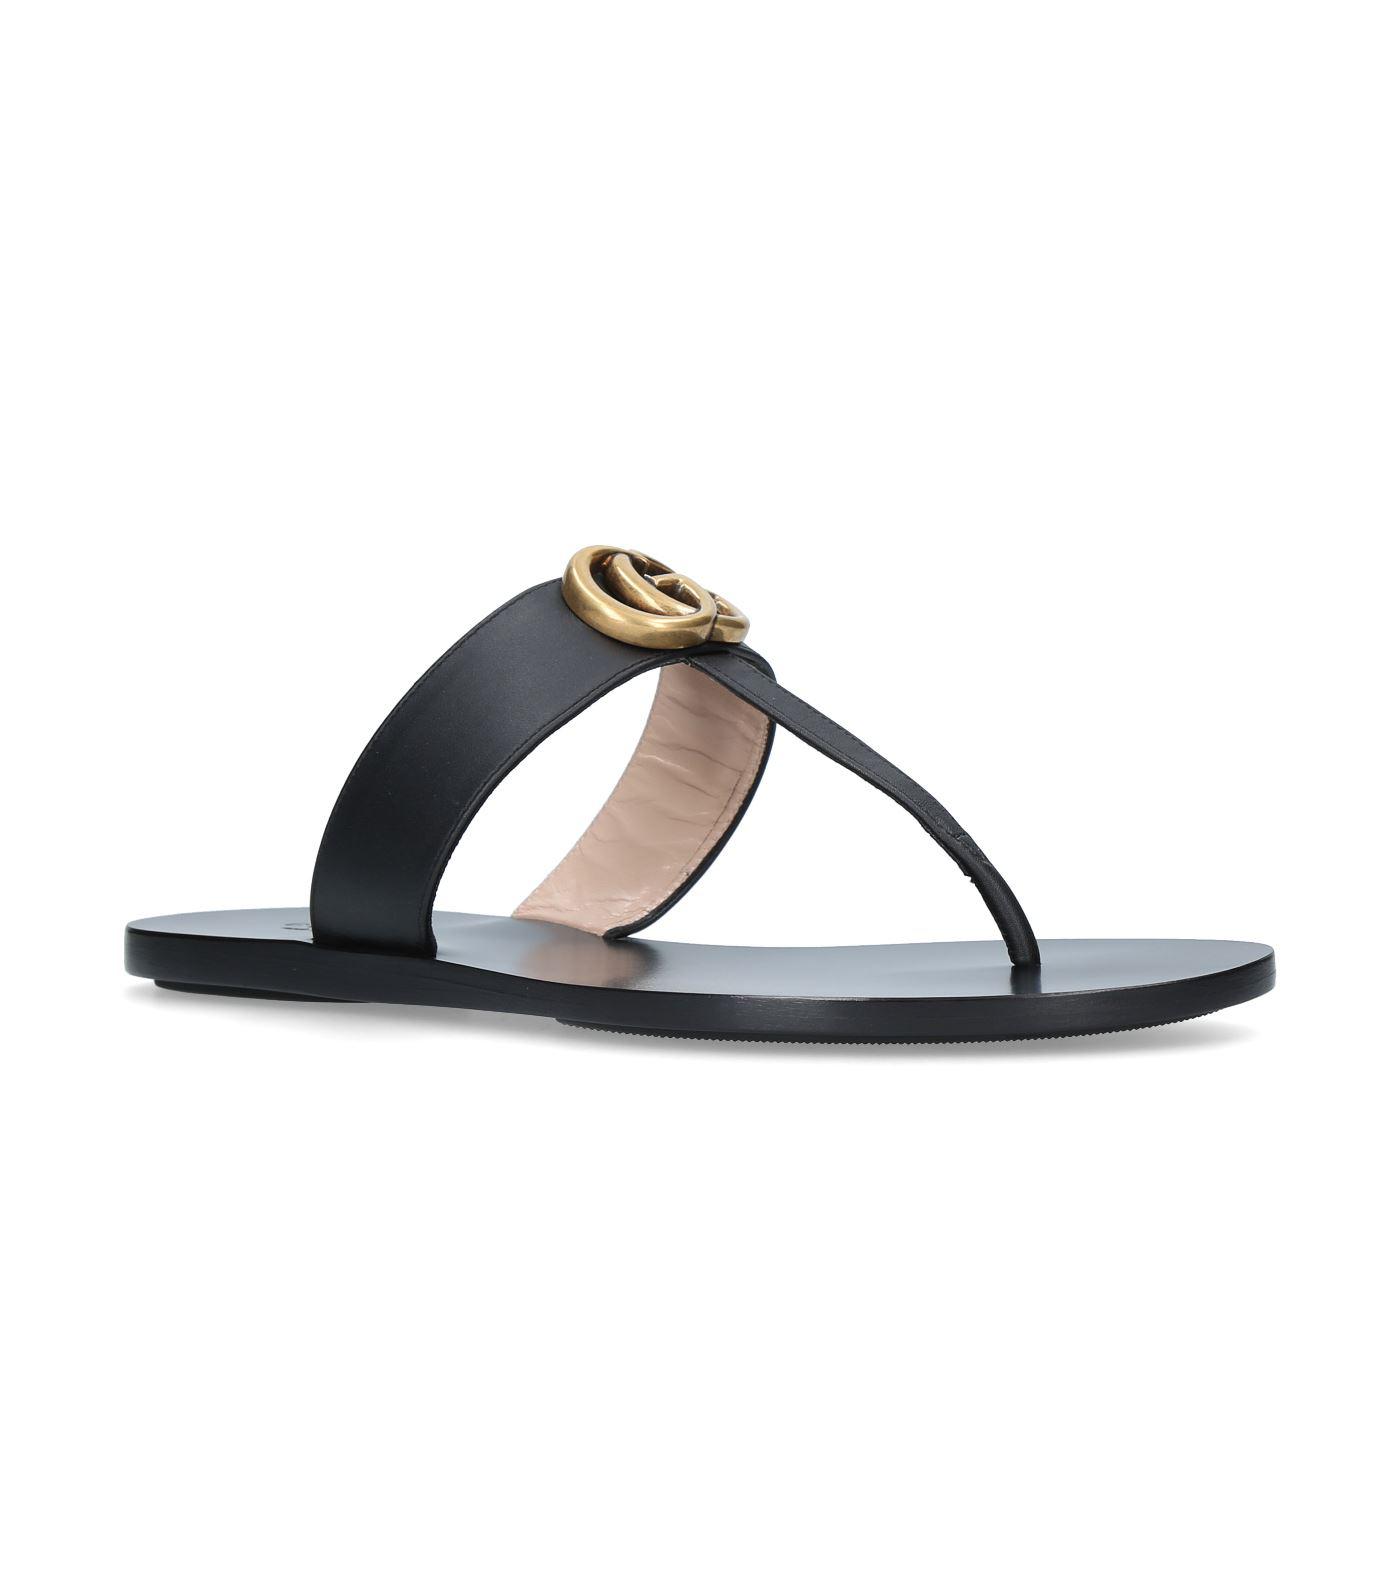 Gucci Leather Marmont Sandals in Black - Save 11% - Lyst